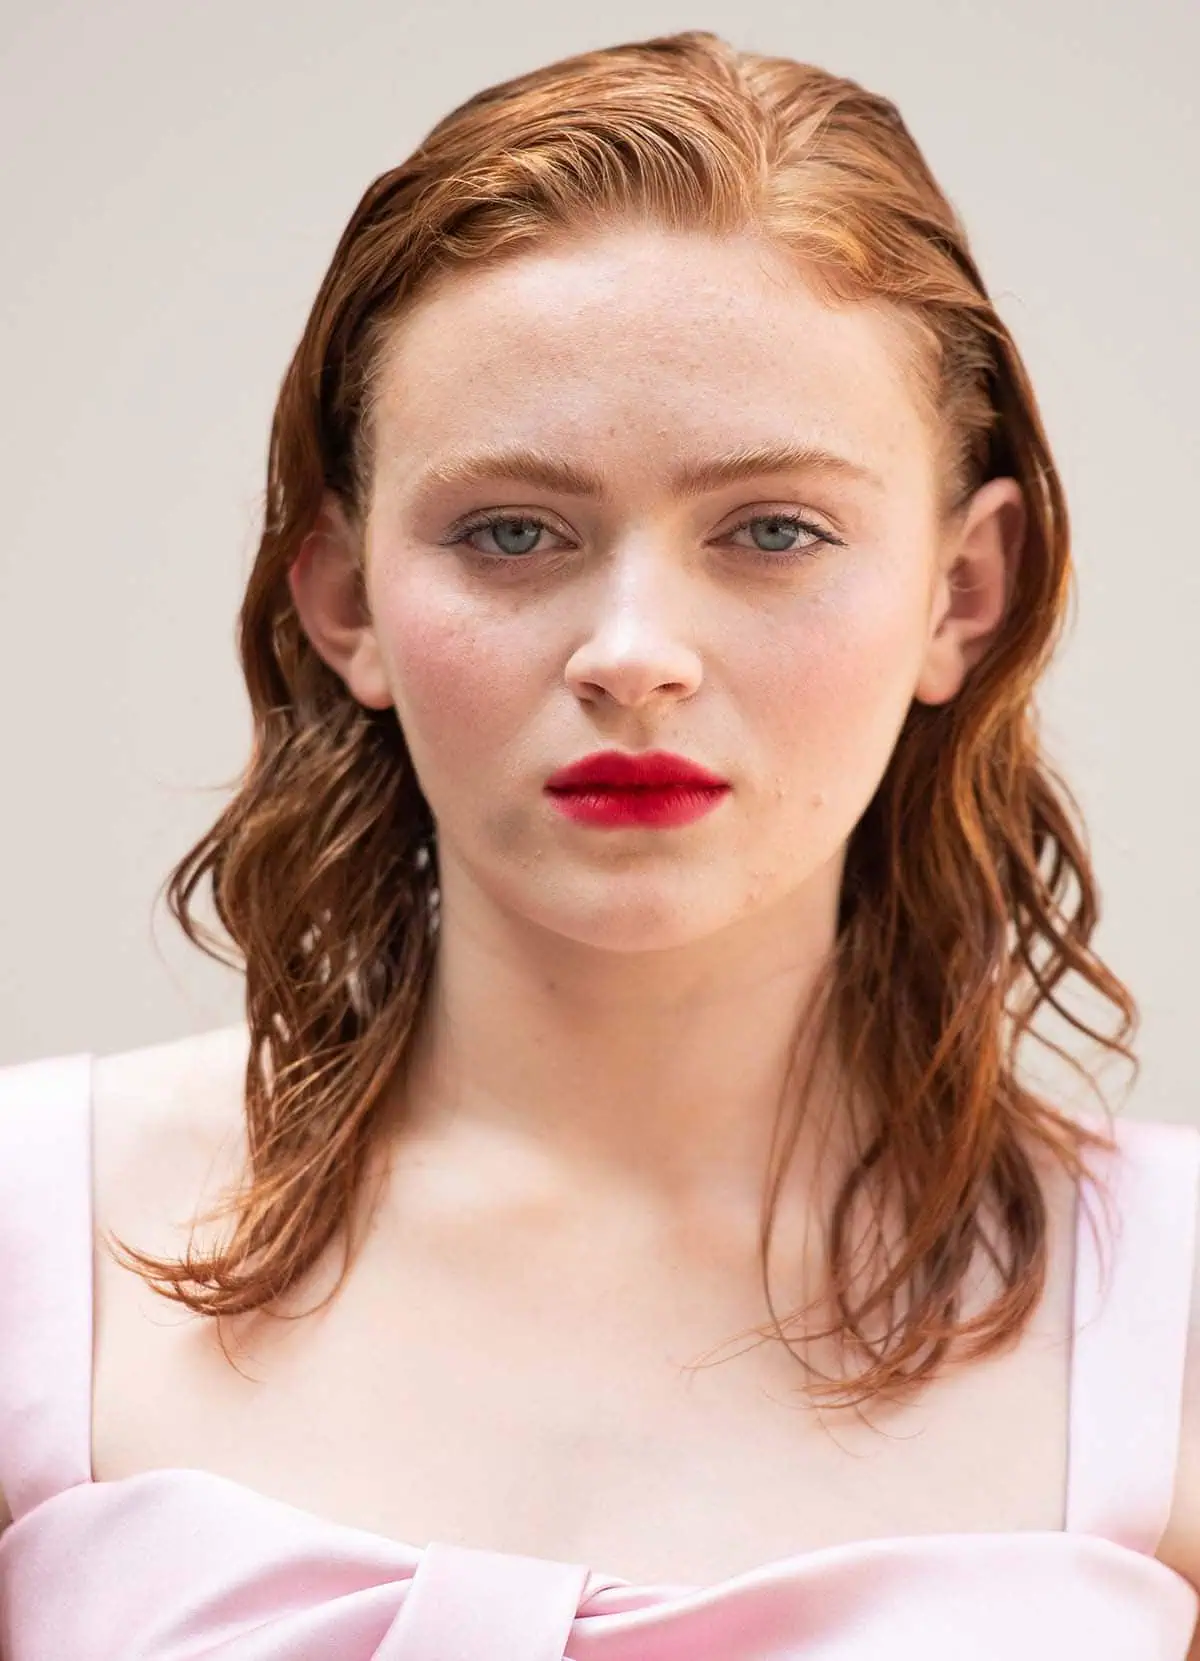 Sadie Sink enhances the outfit's sultry element by styling her ginger tresses in wet-look curls and wearing hot pink lipstick